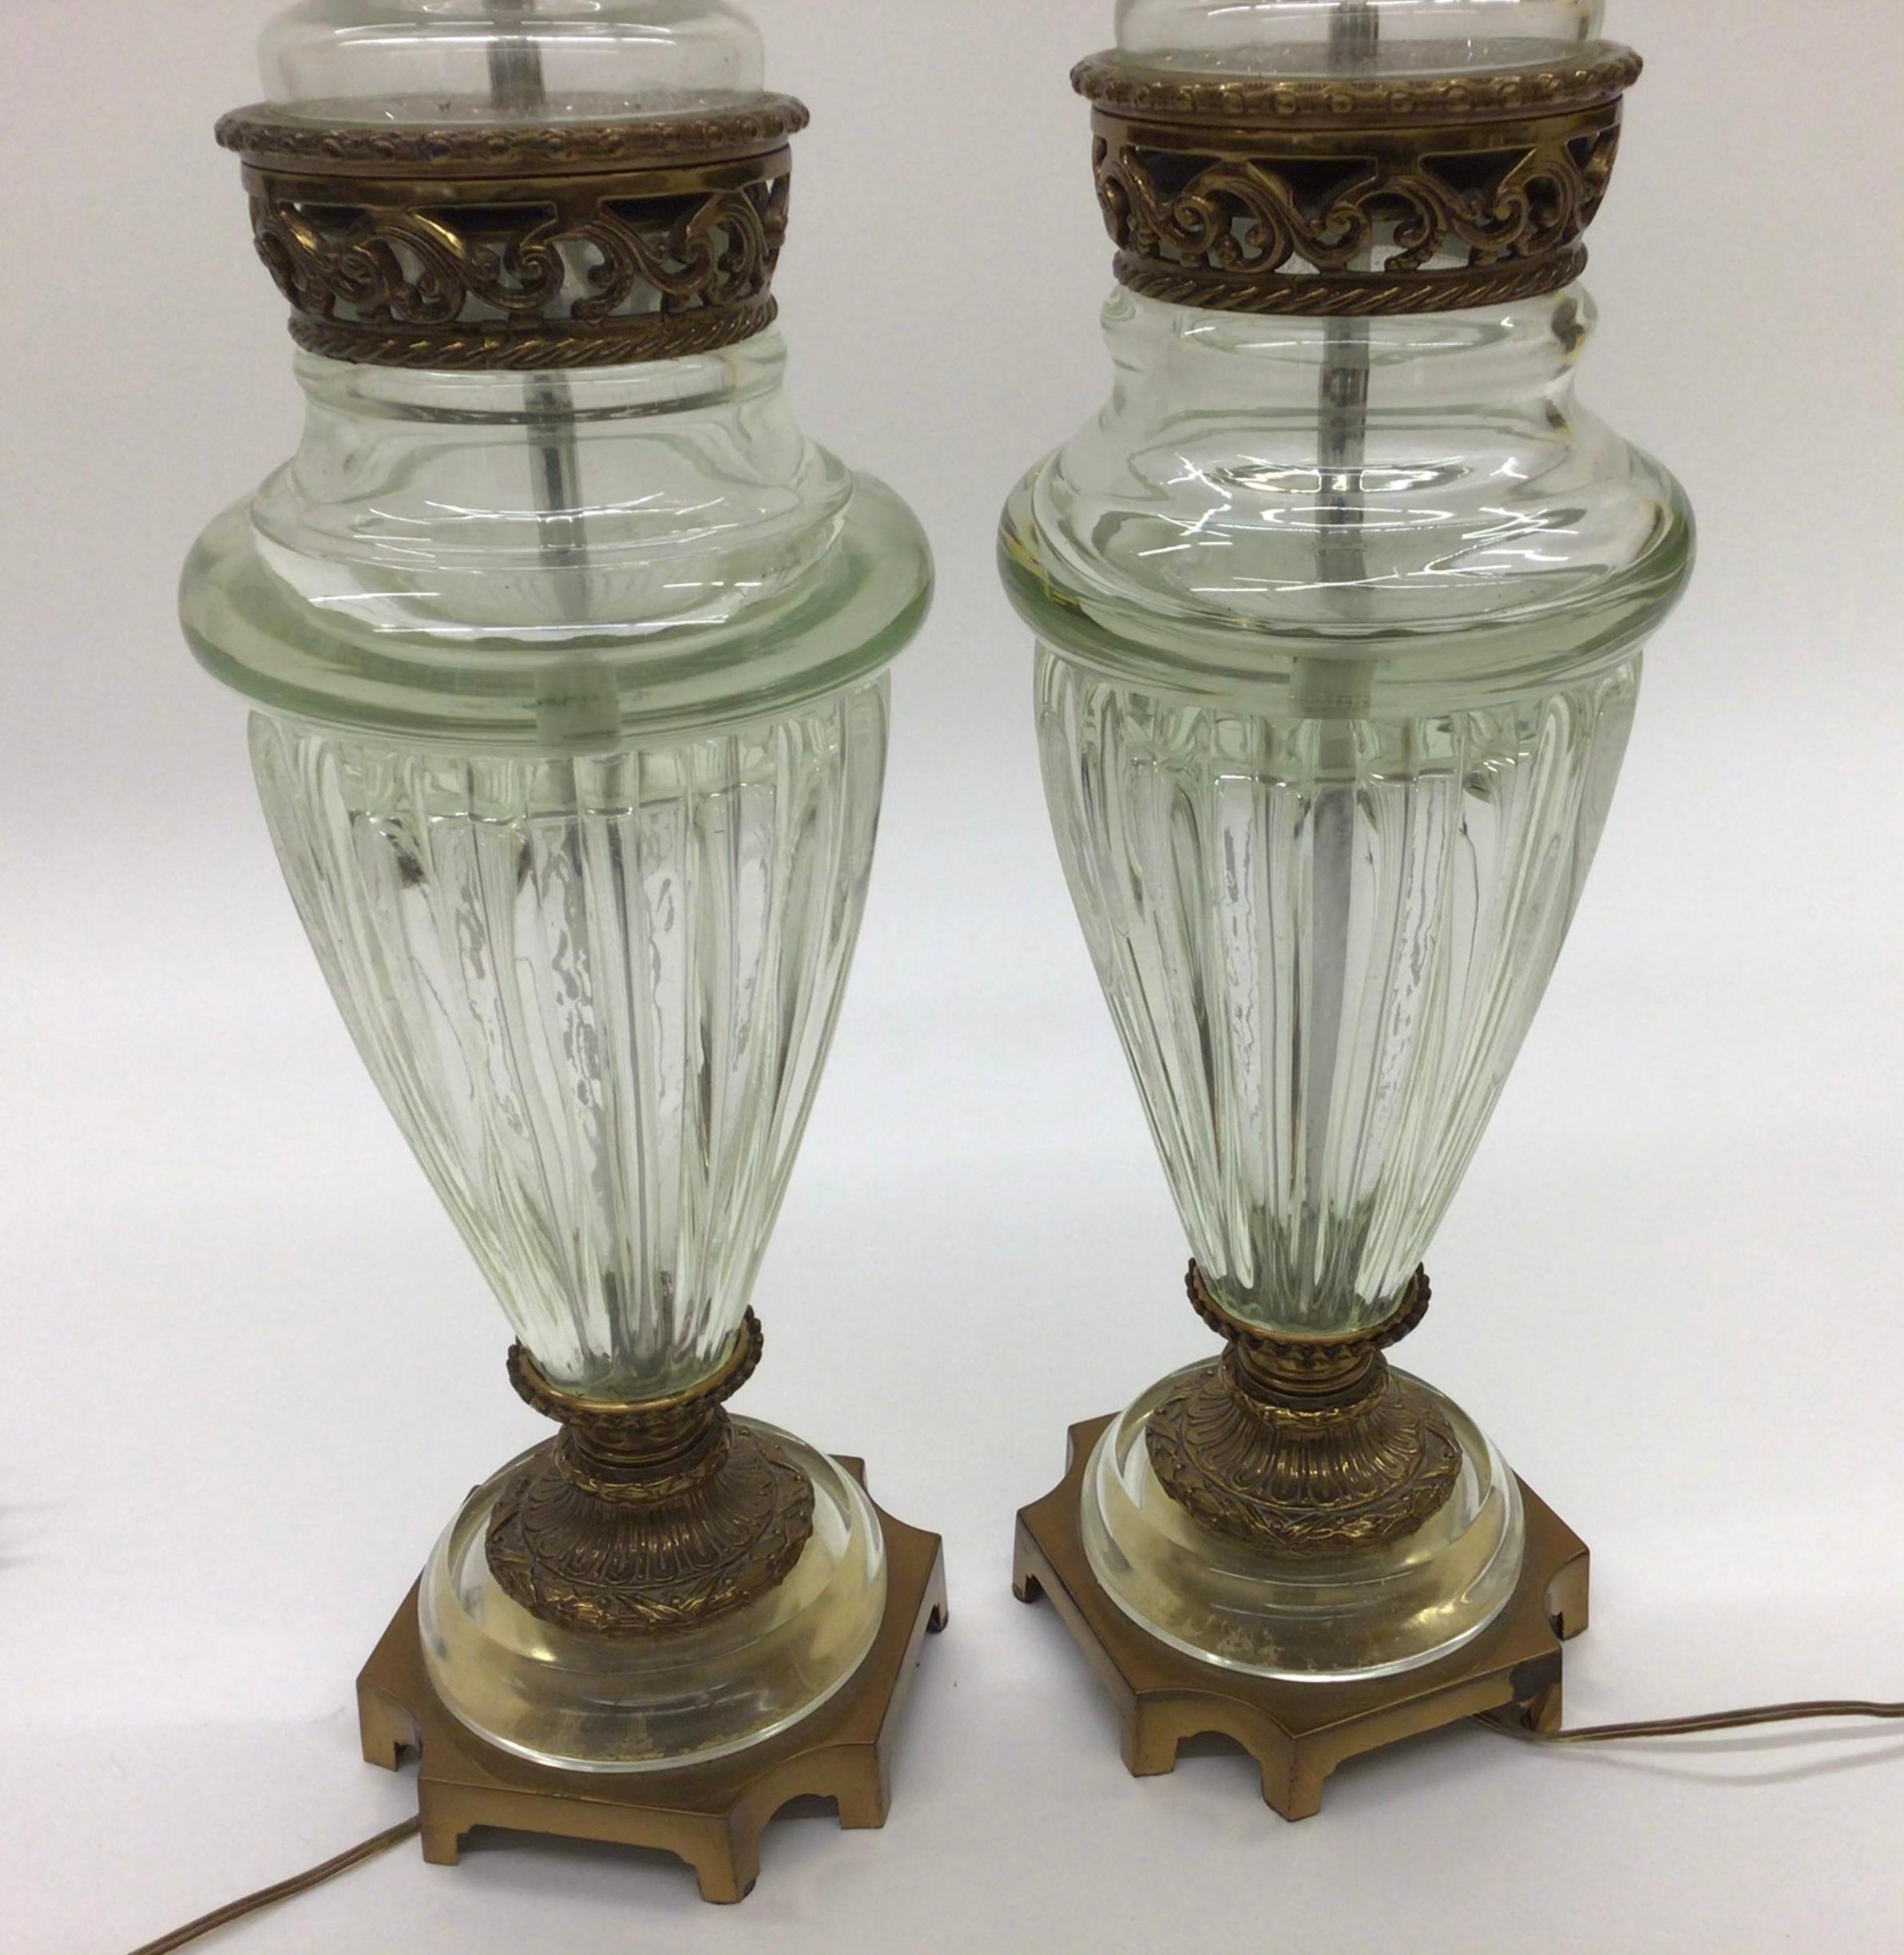 Amazing and Large Pair of Marbro Lamps with Original Murano Vase by Seguso In Good Condition For Sale In Ann Arbor, MI